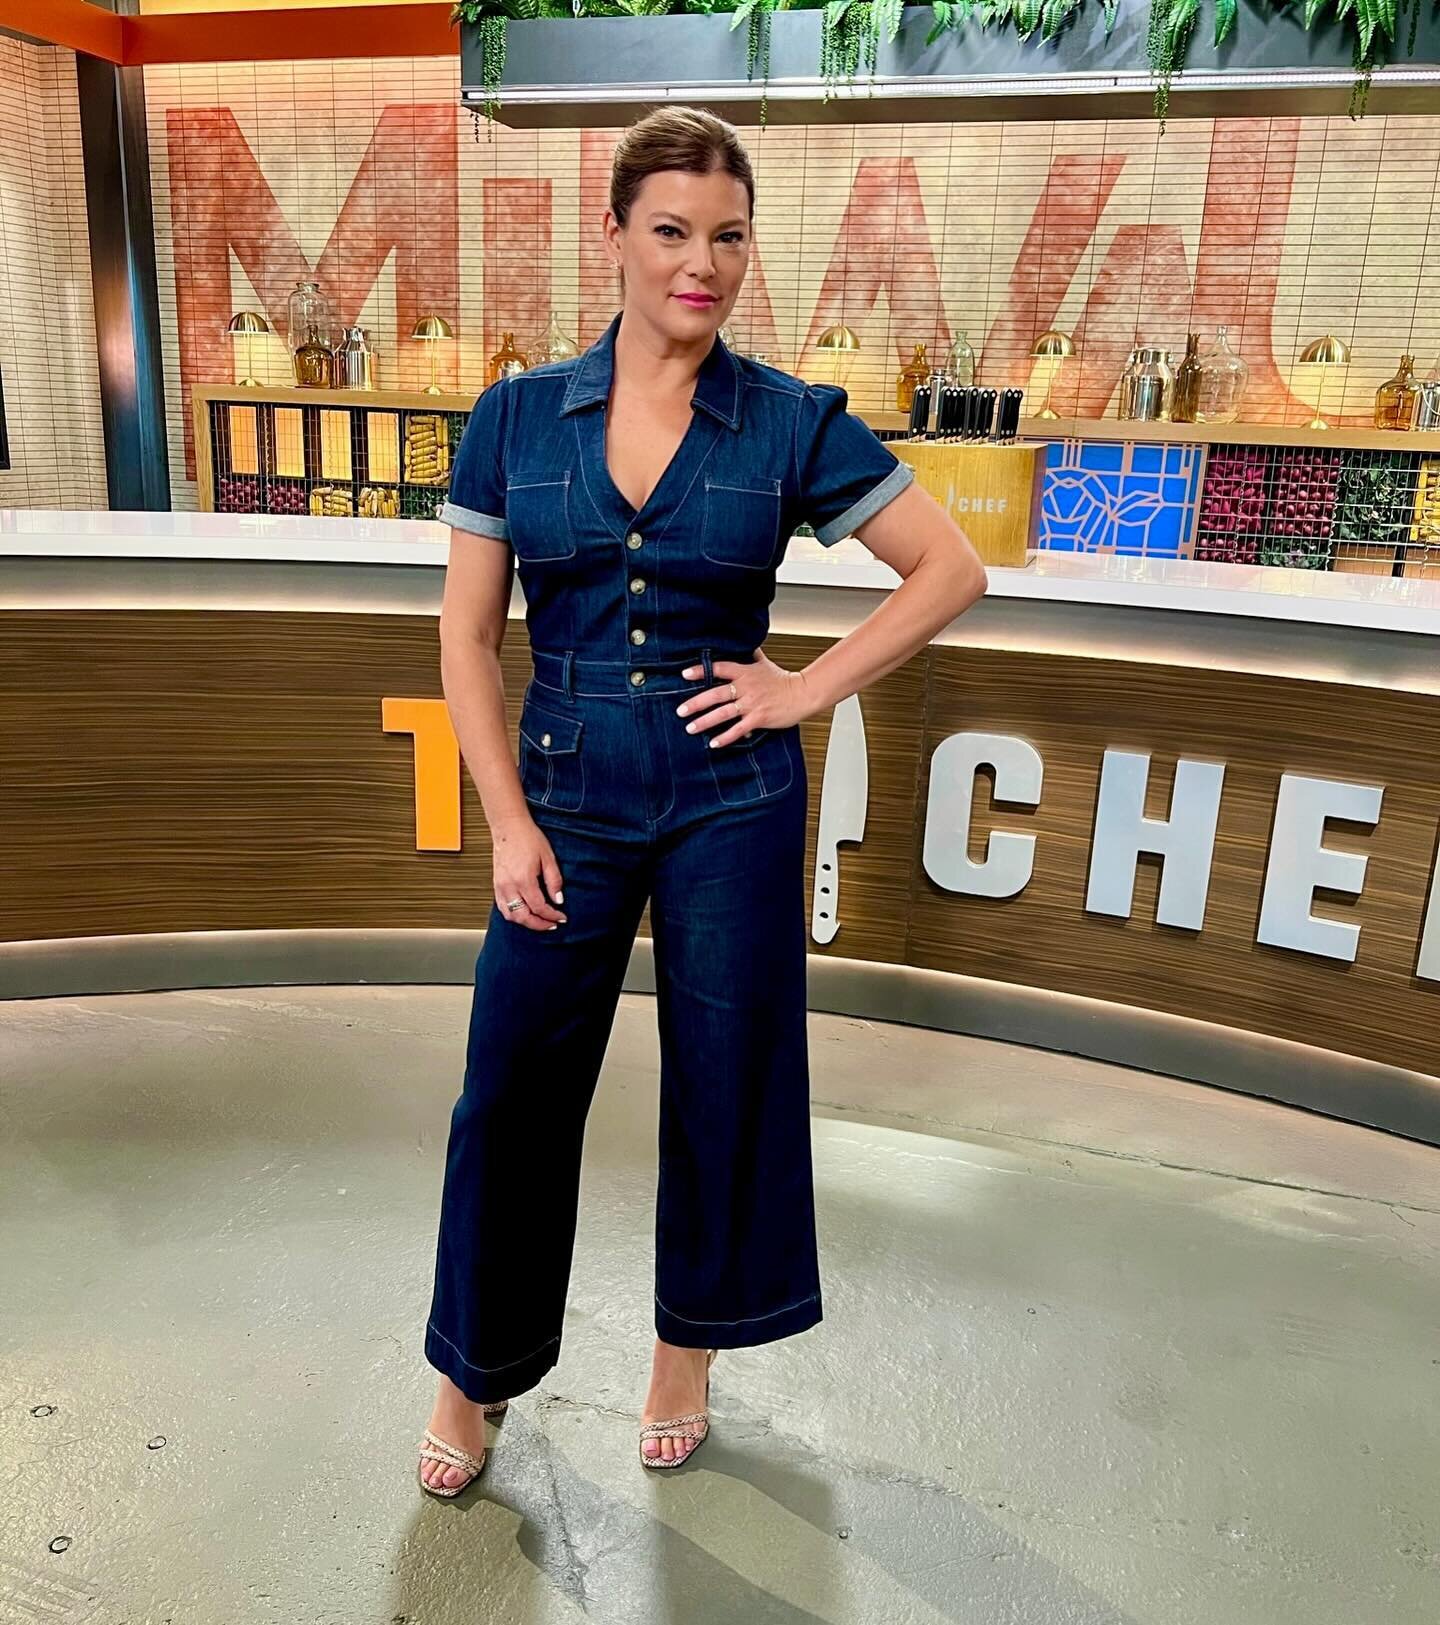 ❣️S E A S O N  2 1❣️ 
Dozens of cities, hundreds of chefs, thousands of delicious bites later, I could not be more ecstatic for this season of @bravotopchef Wisconsin! For six weeks this summer, I was schooled in the Midwestern art of sausage runs an